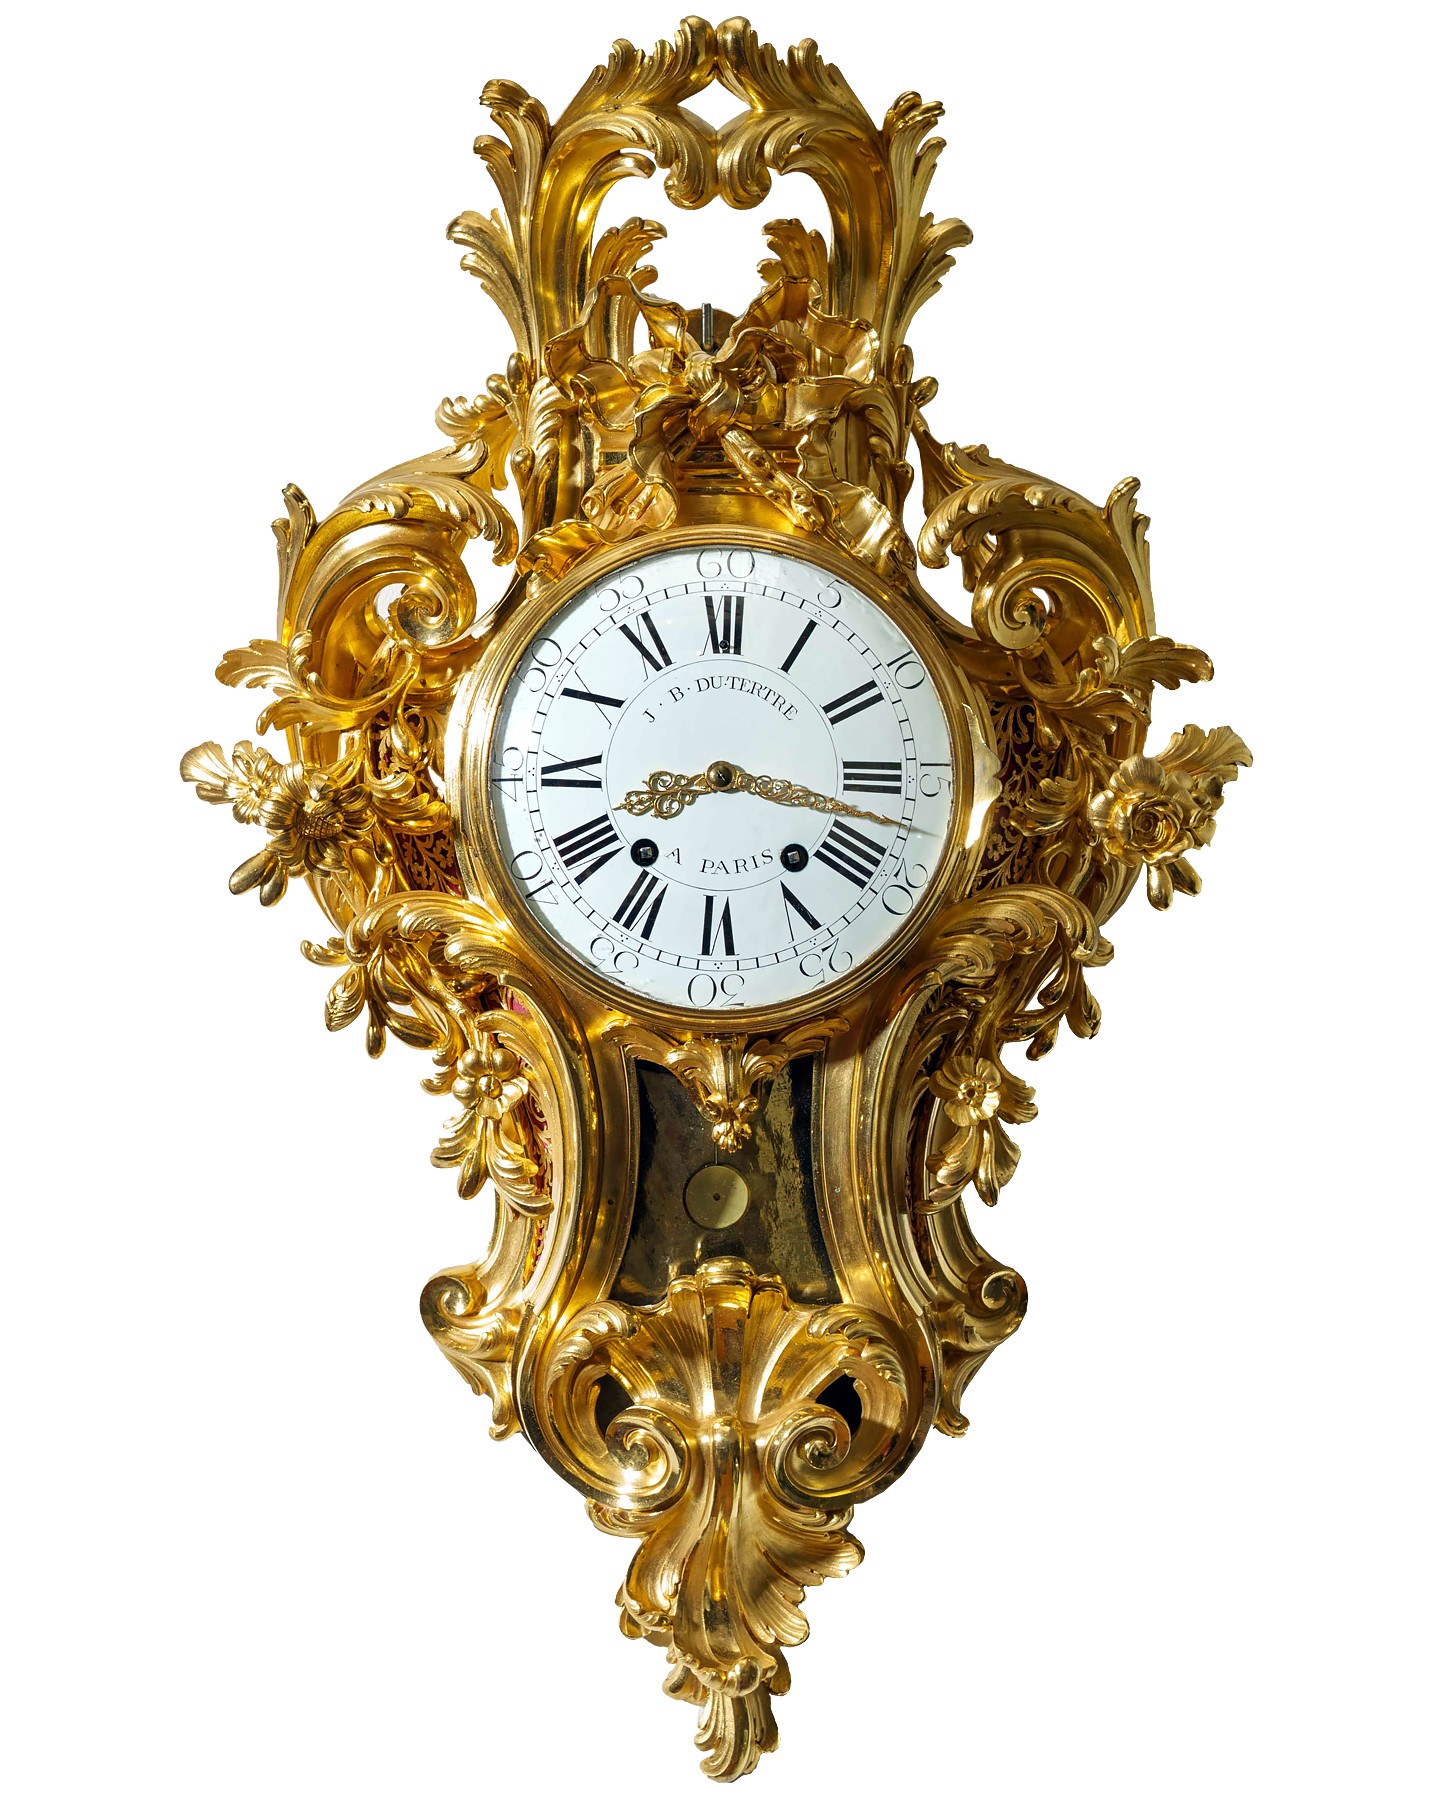 NACHTUHR, Louis XV, Bern circa 1750/70. Bronze and brass. With pierced  turning brass disk before bronze case. Verge escapement with short back  pendulum. 16x10x31 cm. Provenance: Swiss private collection.